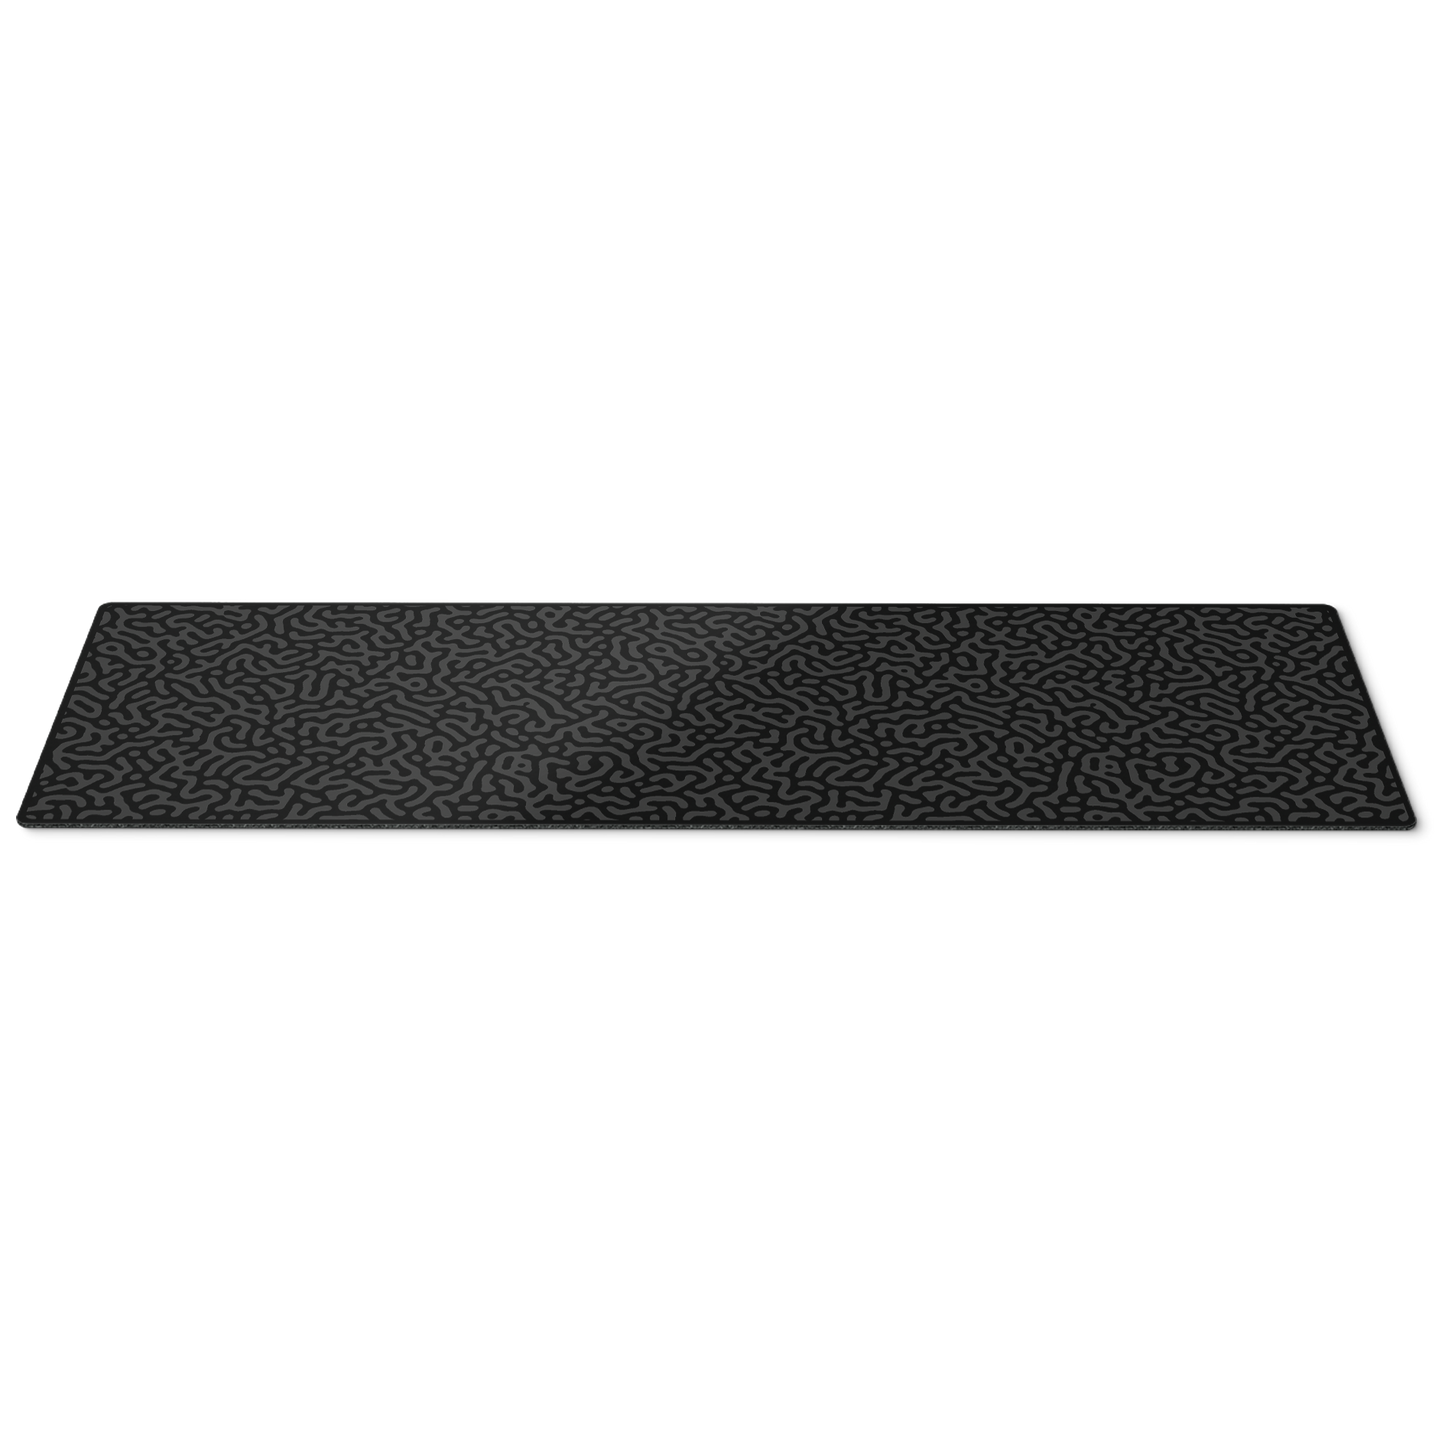 CM Stealth Edition XL Gaming Mouse Mat